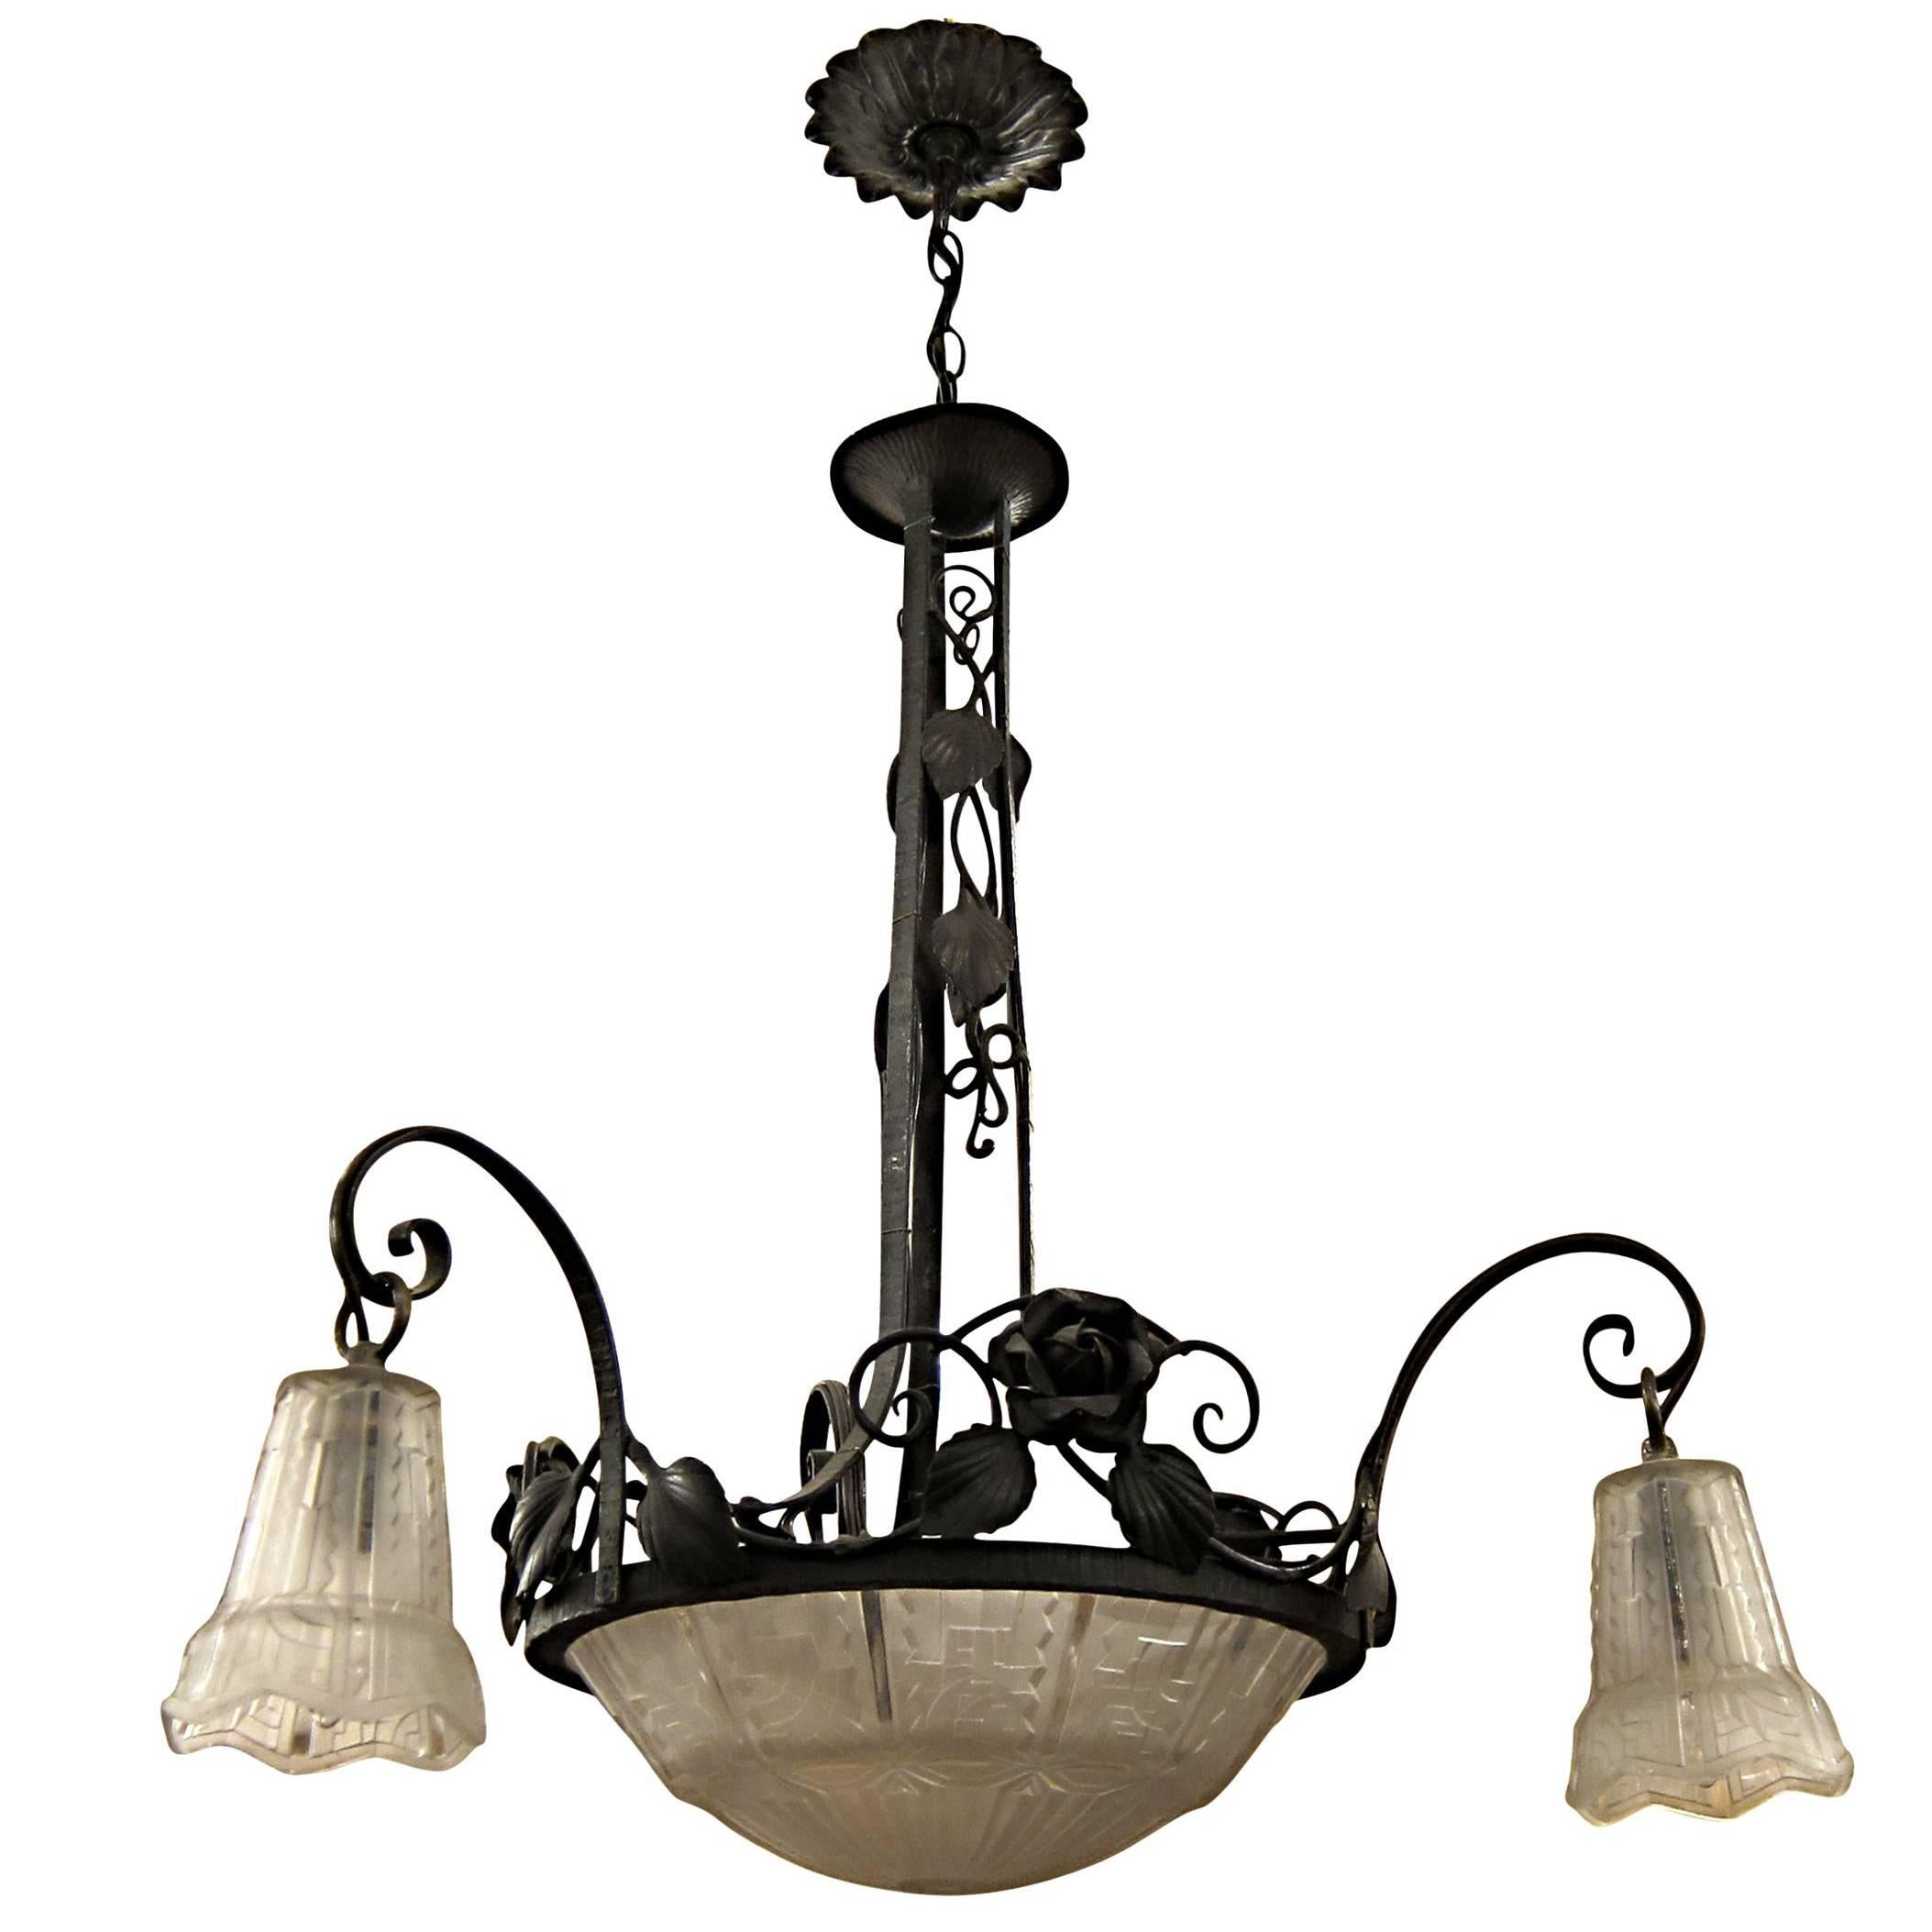 Art Deco Wrought Iron and Cast Glass Chandelier with Floral Details